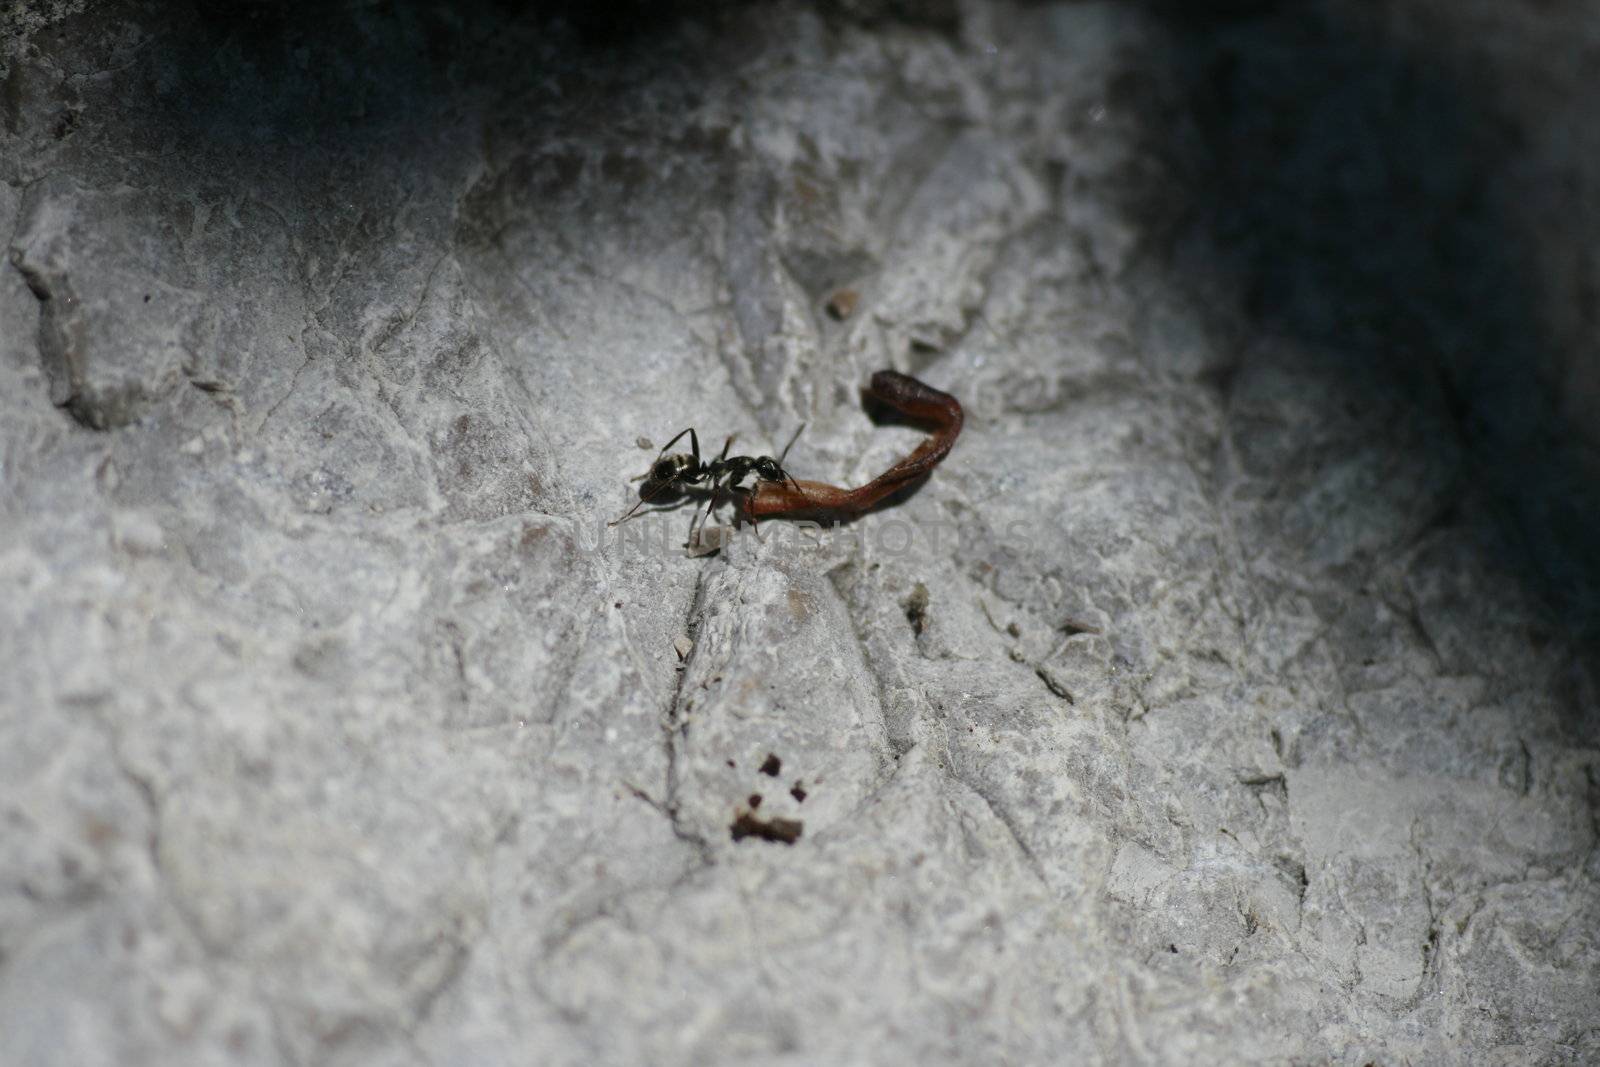 Ant carries a fir needle